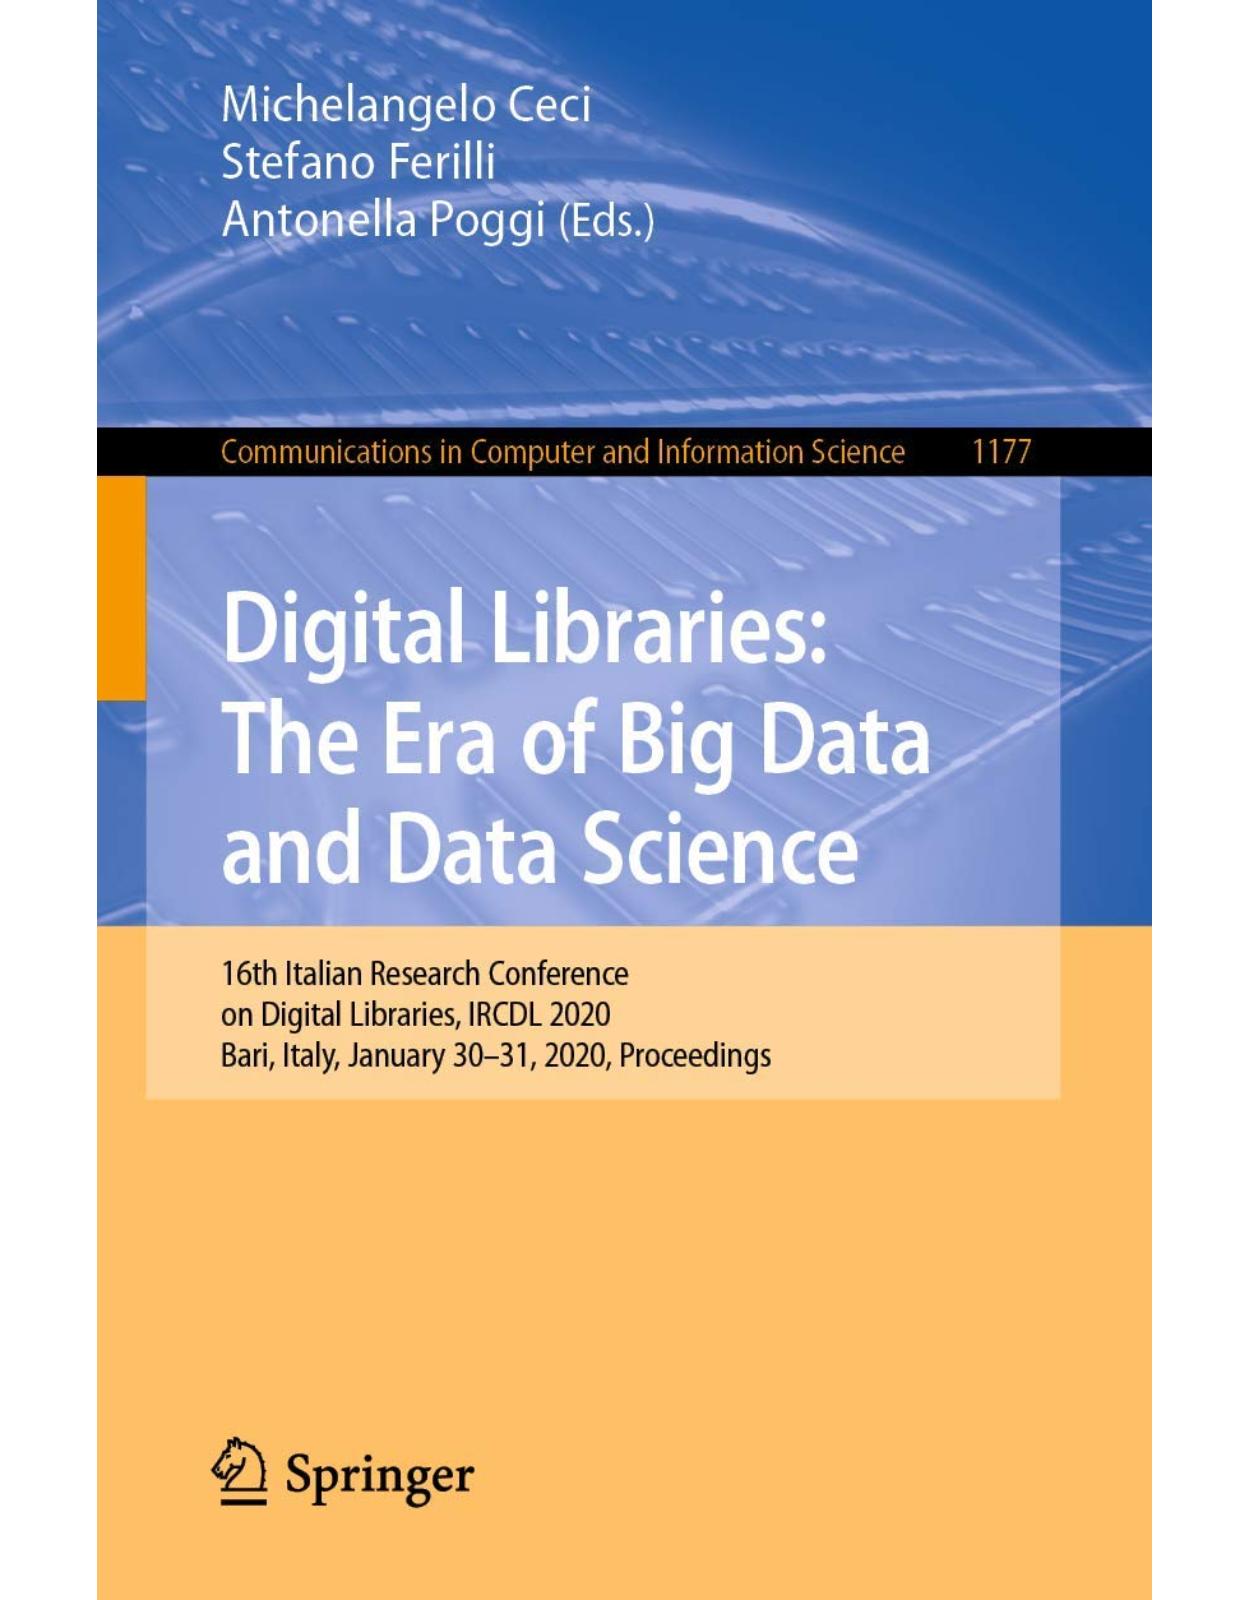 Digital Libraries: The Era of Big Data and Data Science